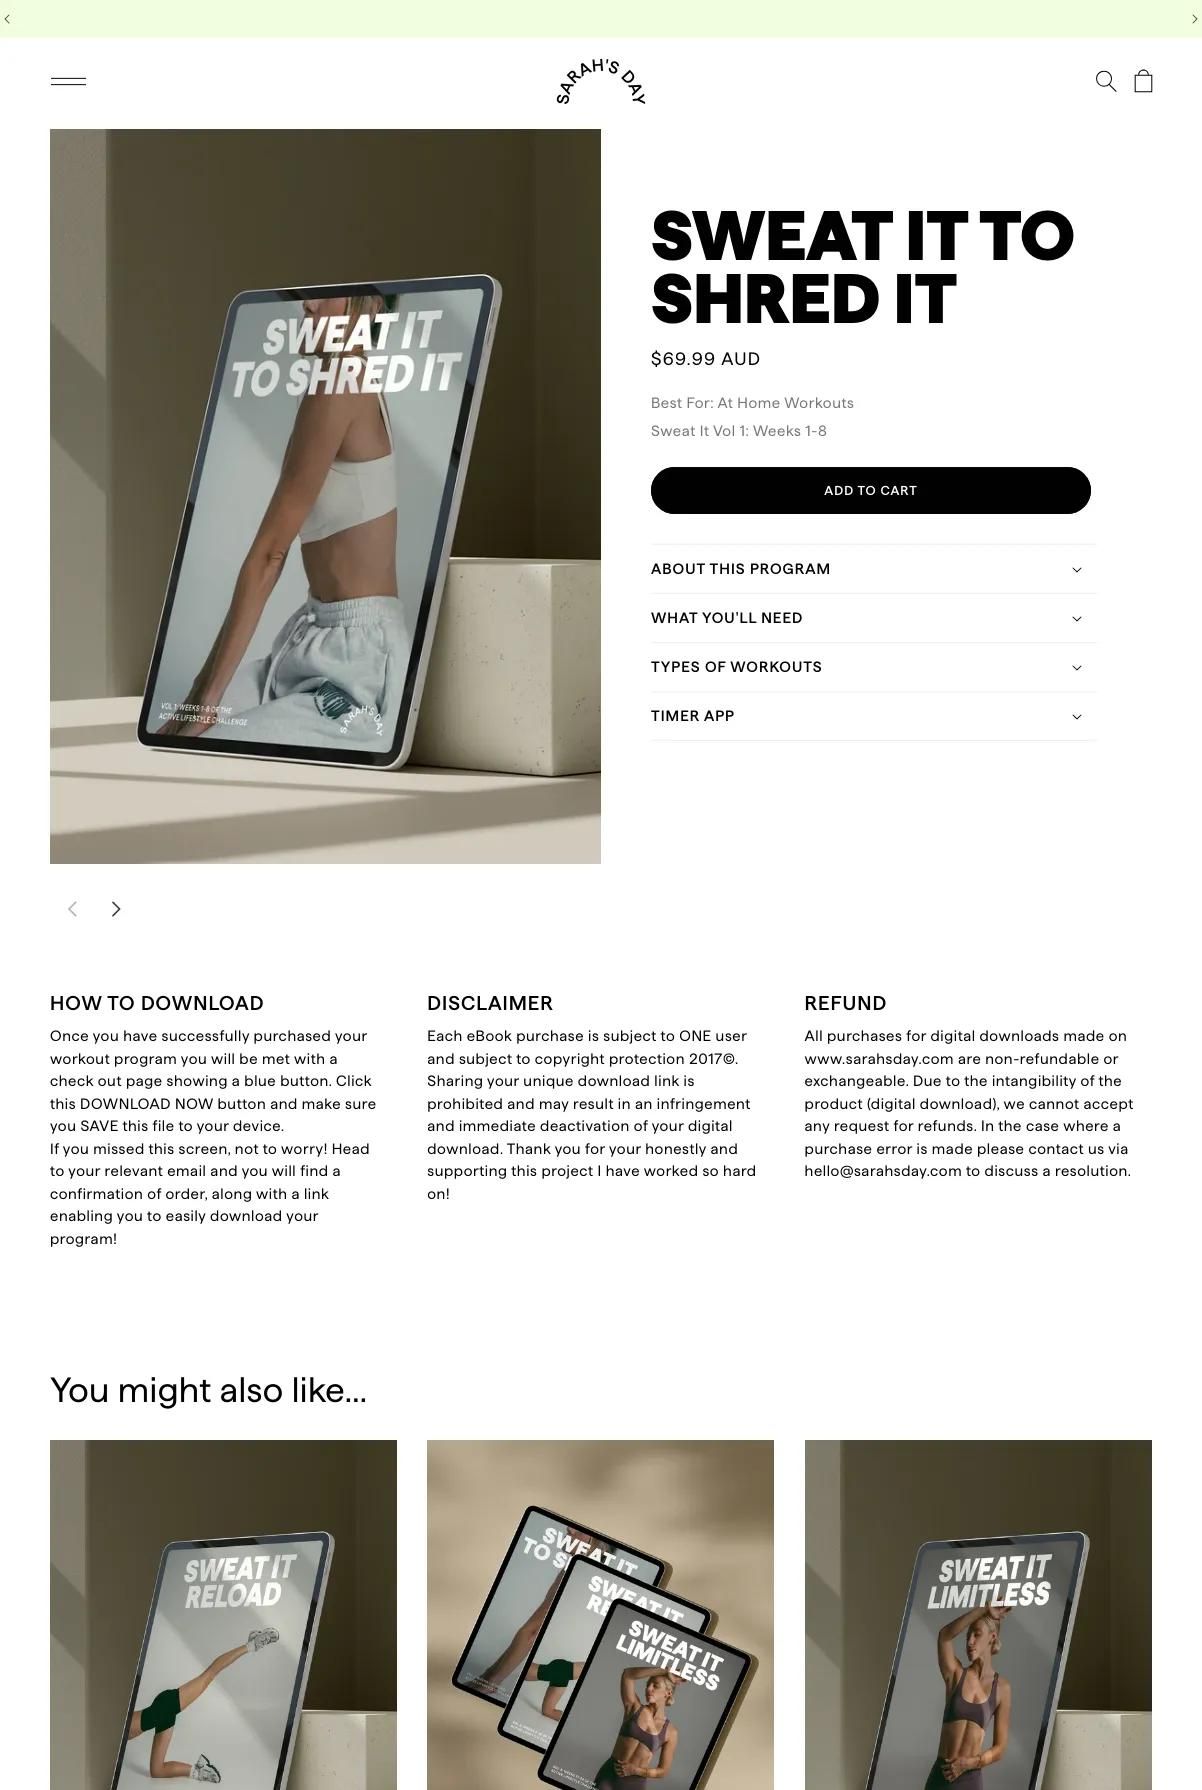 Screenshot 3 of Sarah's Day (Example Squarespace Ecommerce Website)